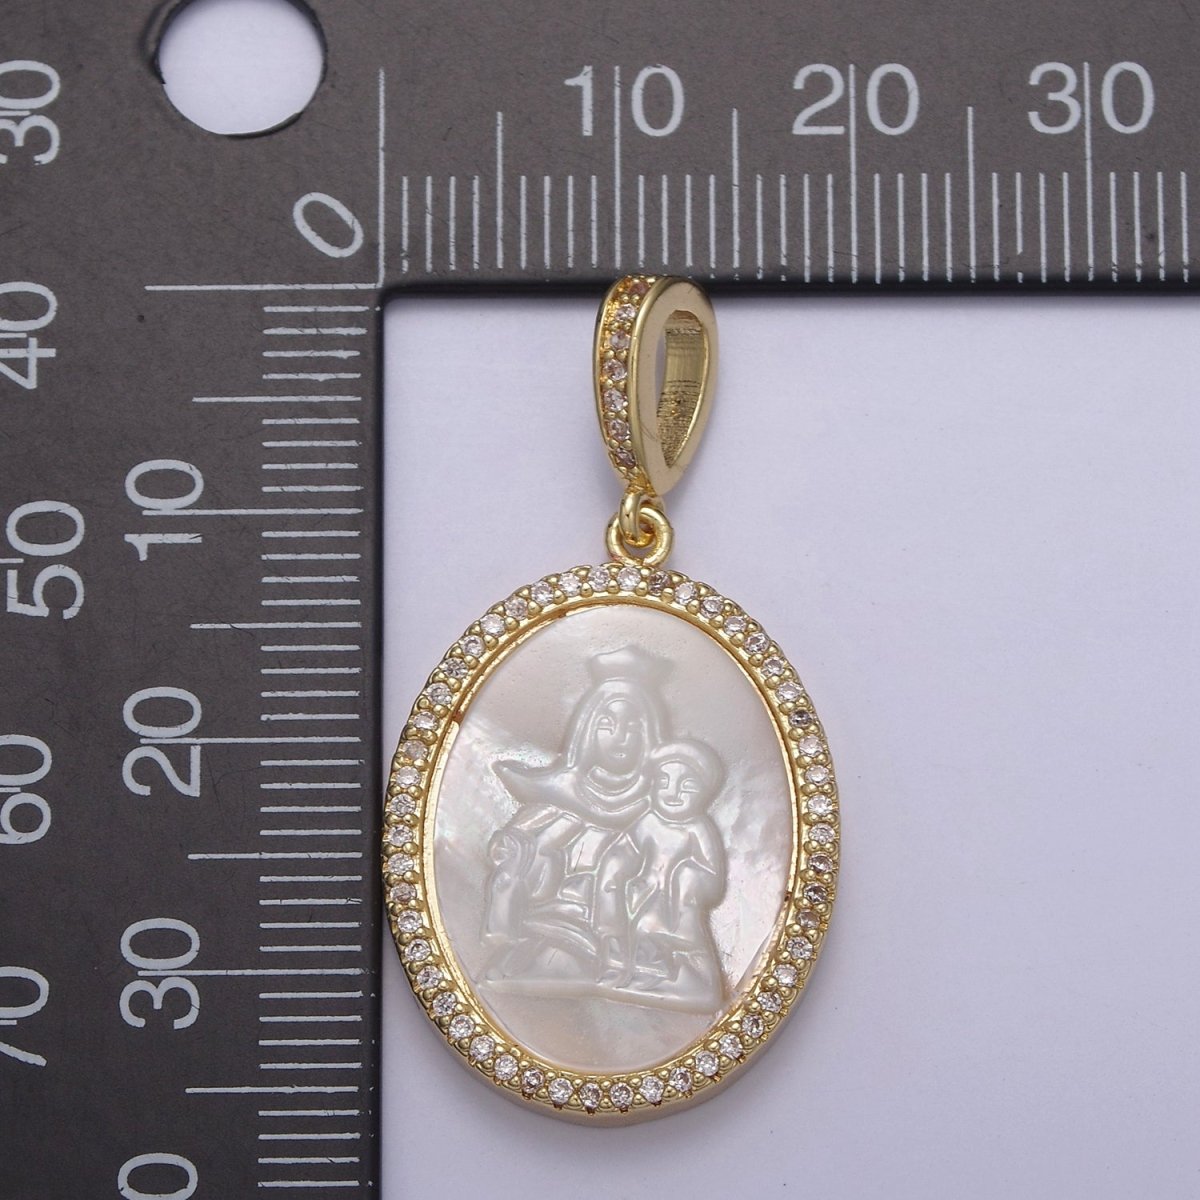 Pearl Virgin Mary Medallion Charm Gold Virgin Mary with baby Jesus pendant. Religious jewelry N-562 - DLUXCA